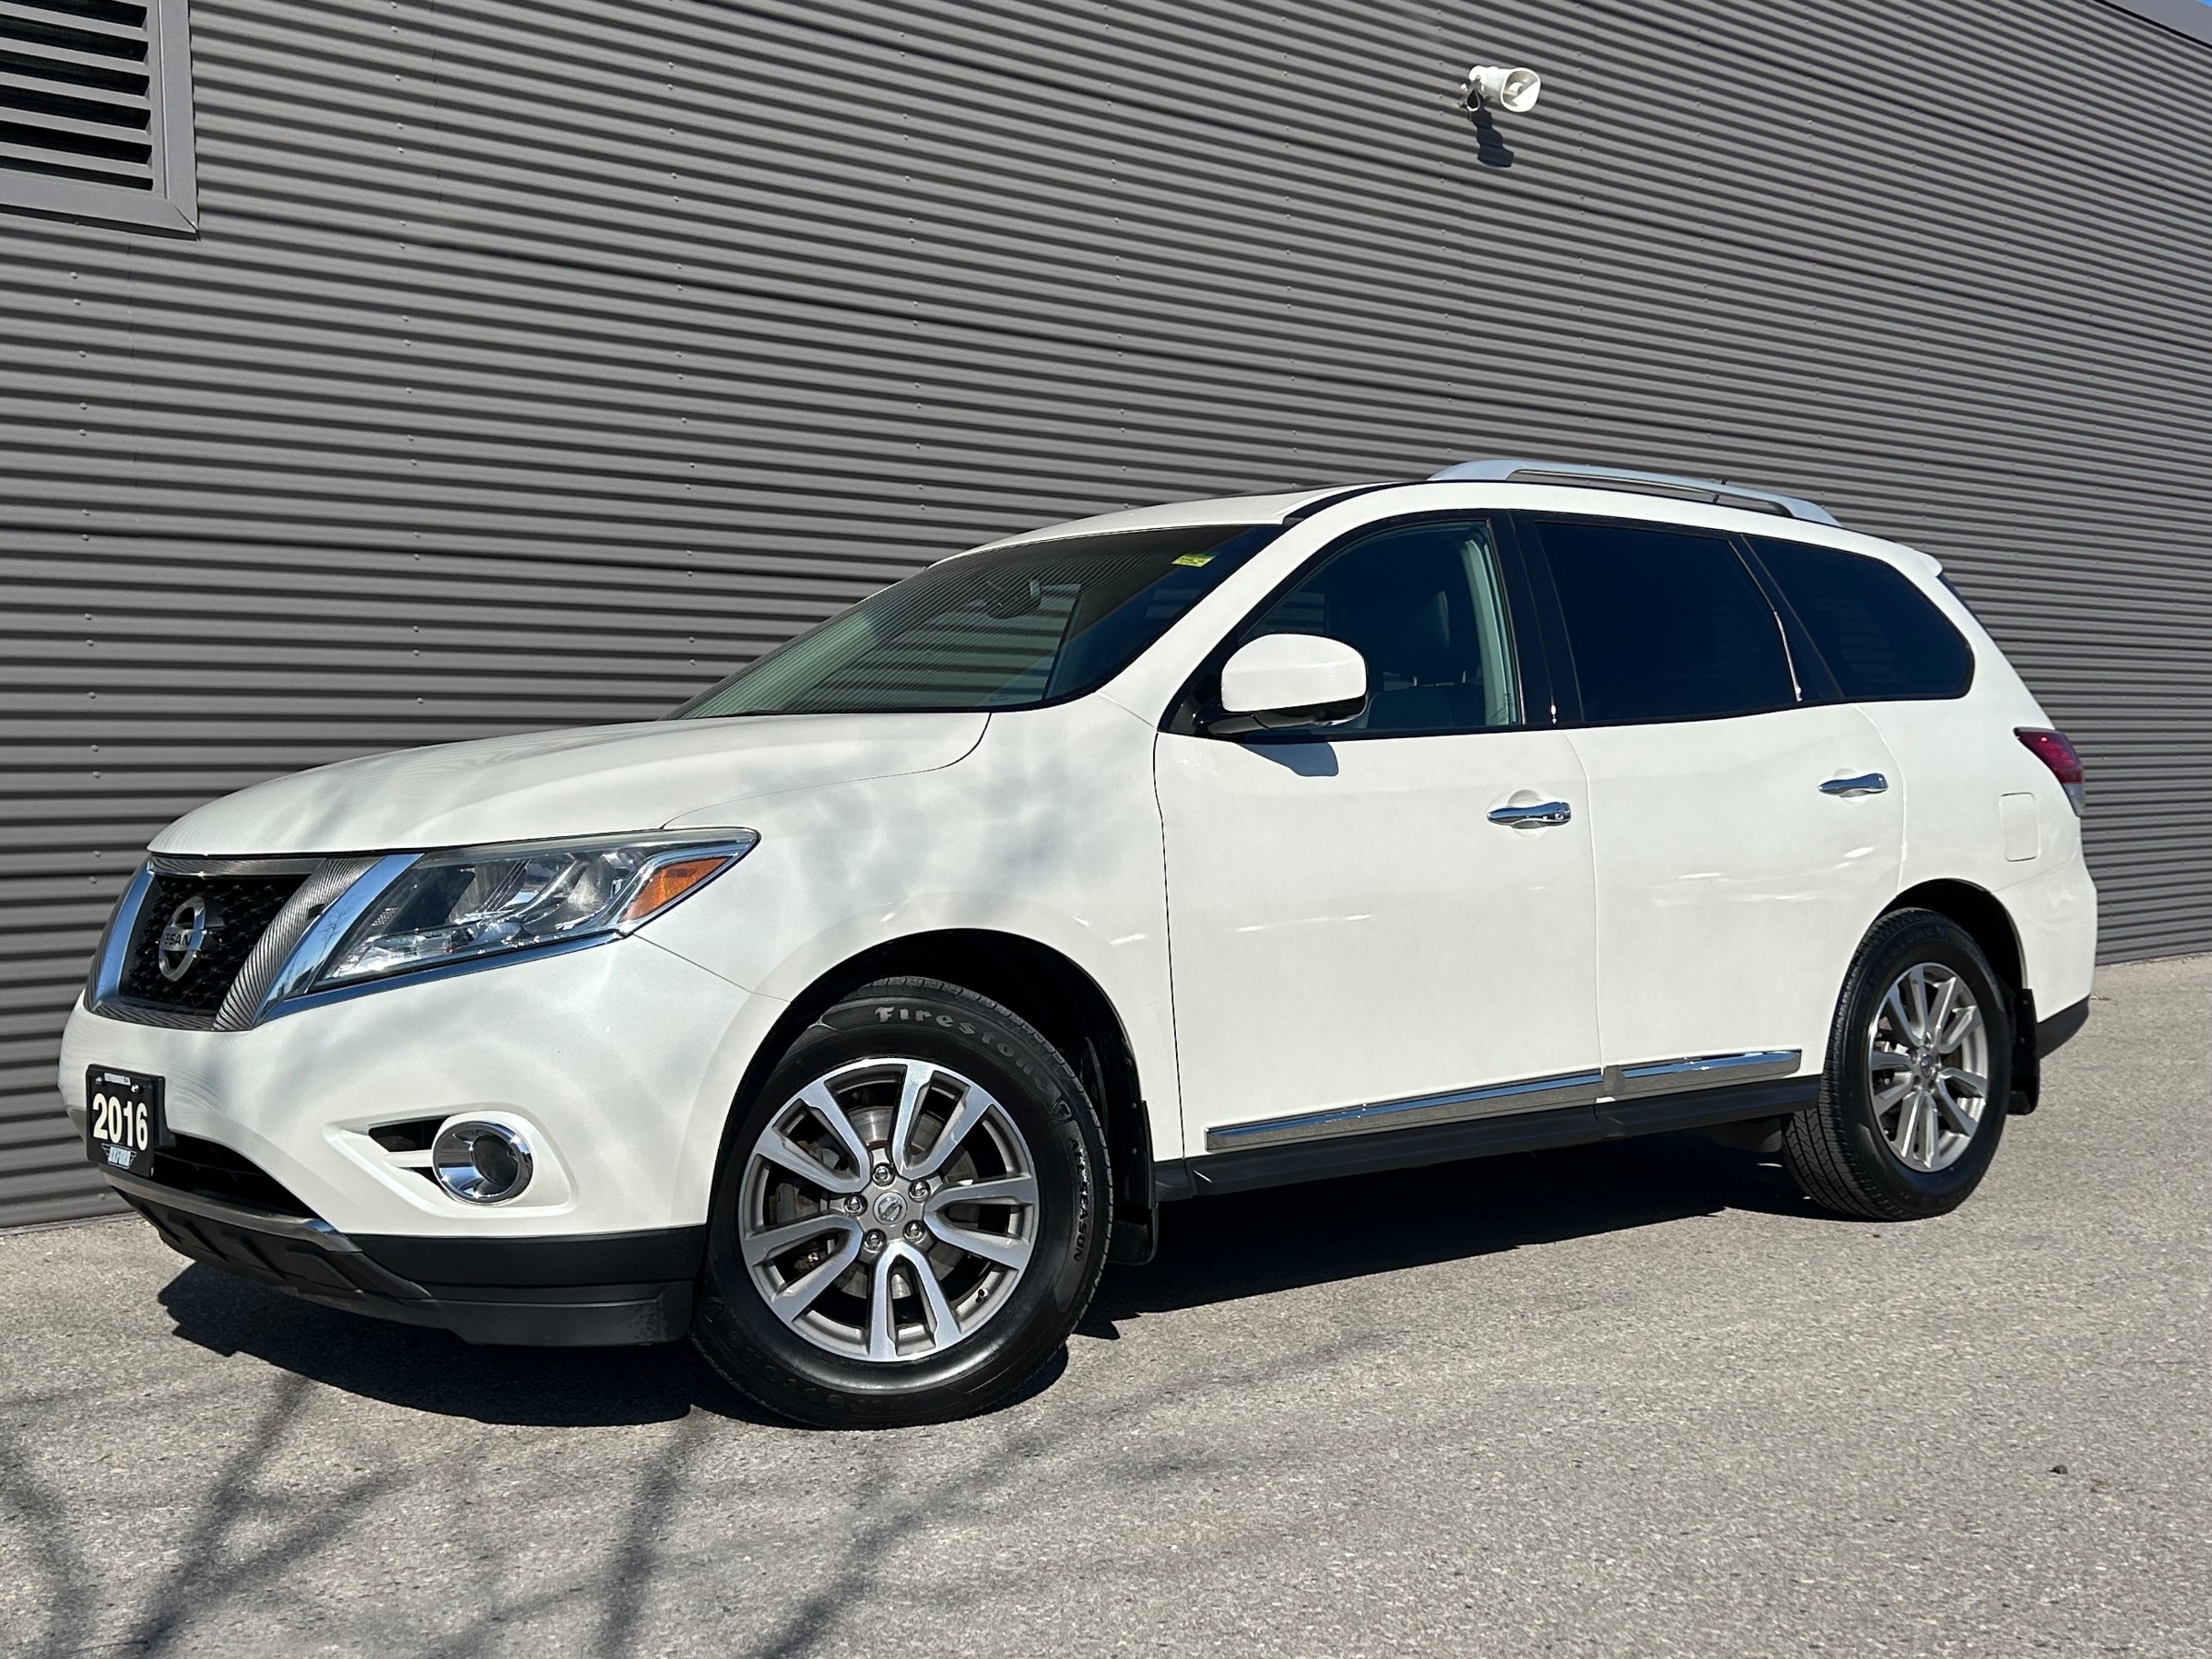 2016 Nissan Pathfinder SV CLEAN CARFAX, 7 PASSENGER SUV, WELL MAINTAINED,